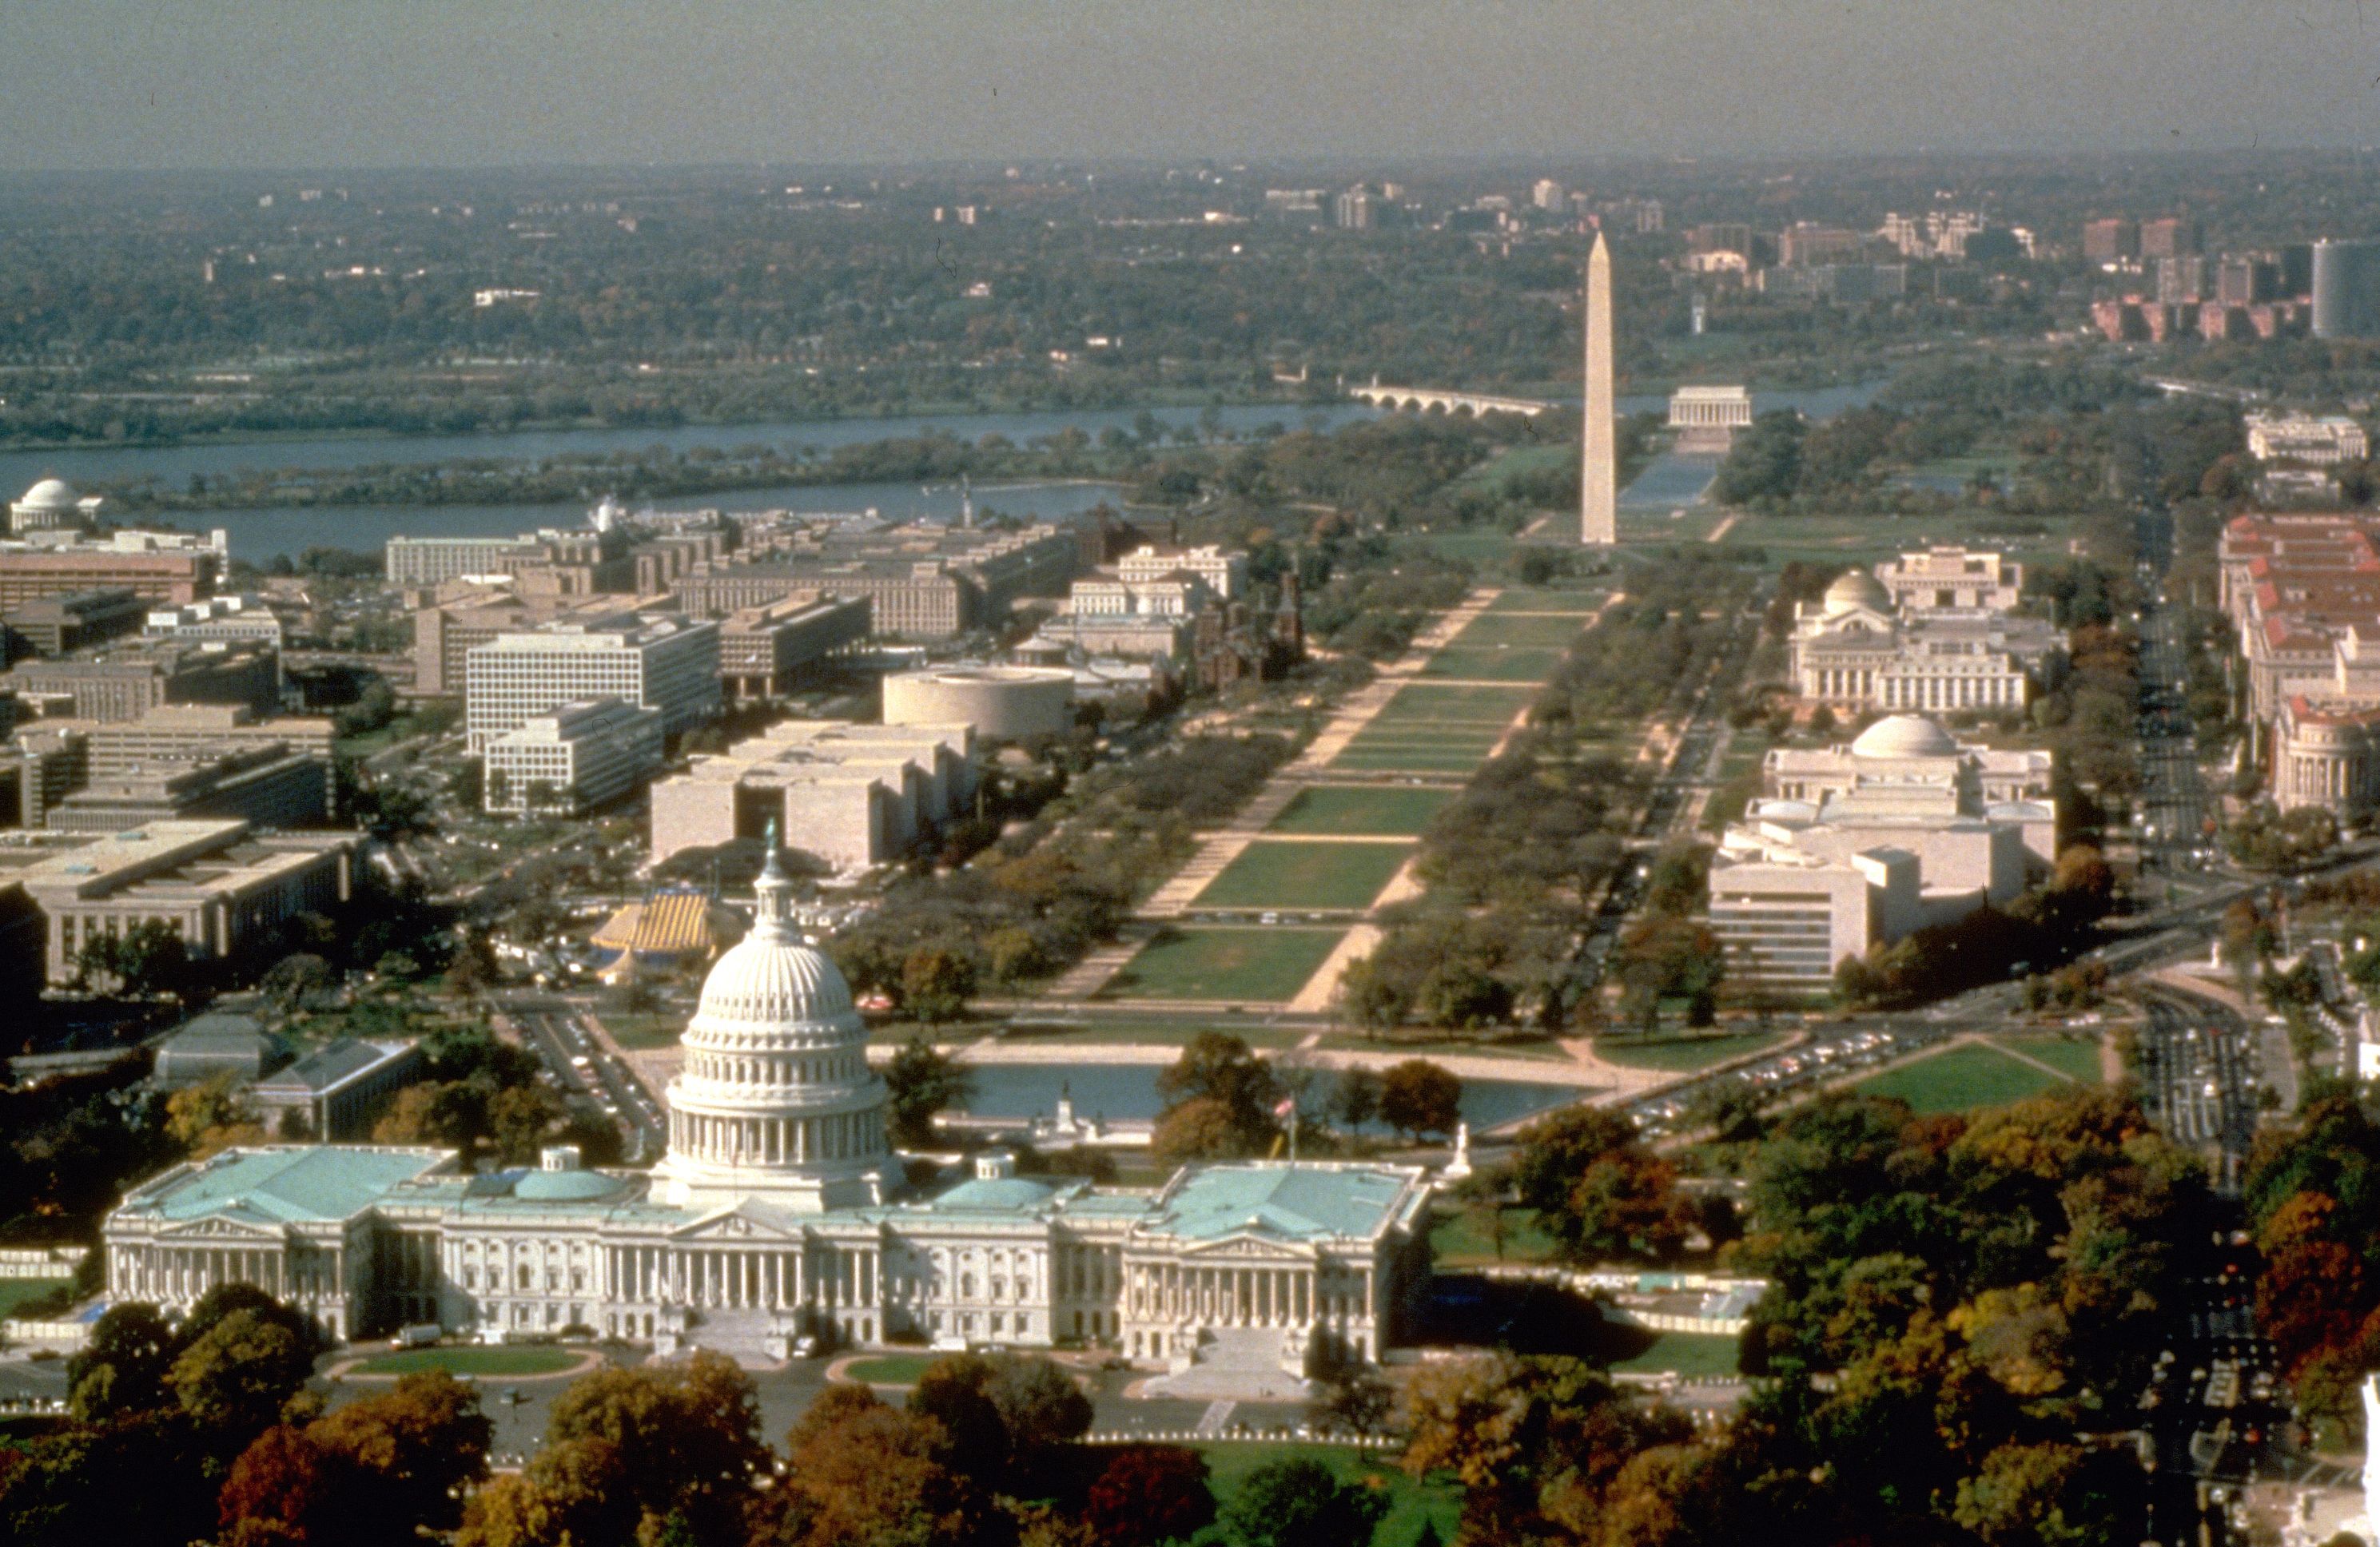 The National Mall in Washington DC (What to See and Do)